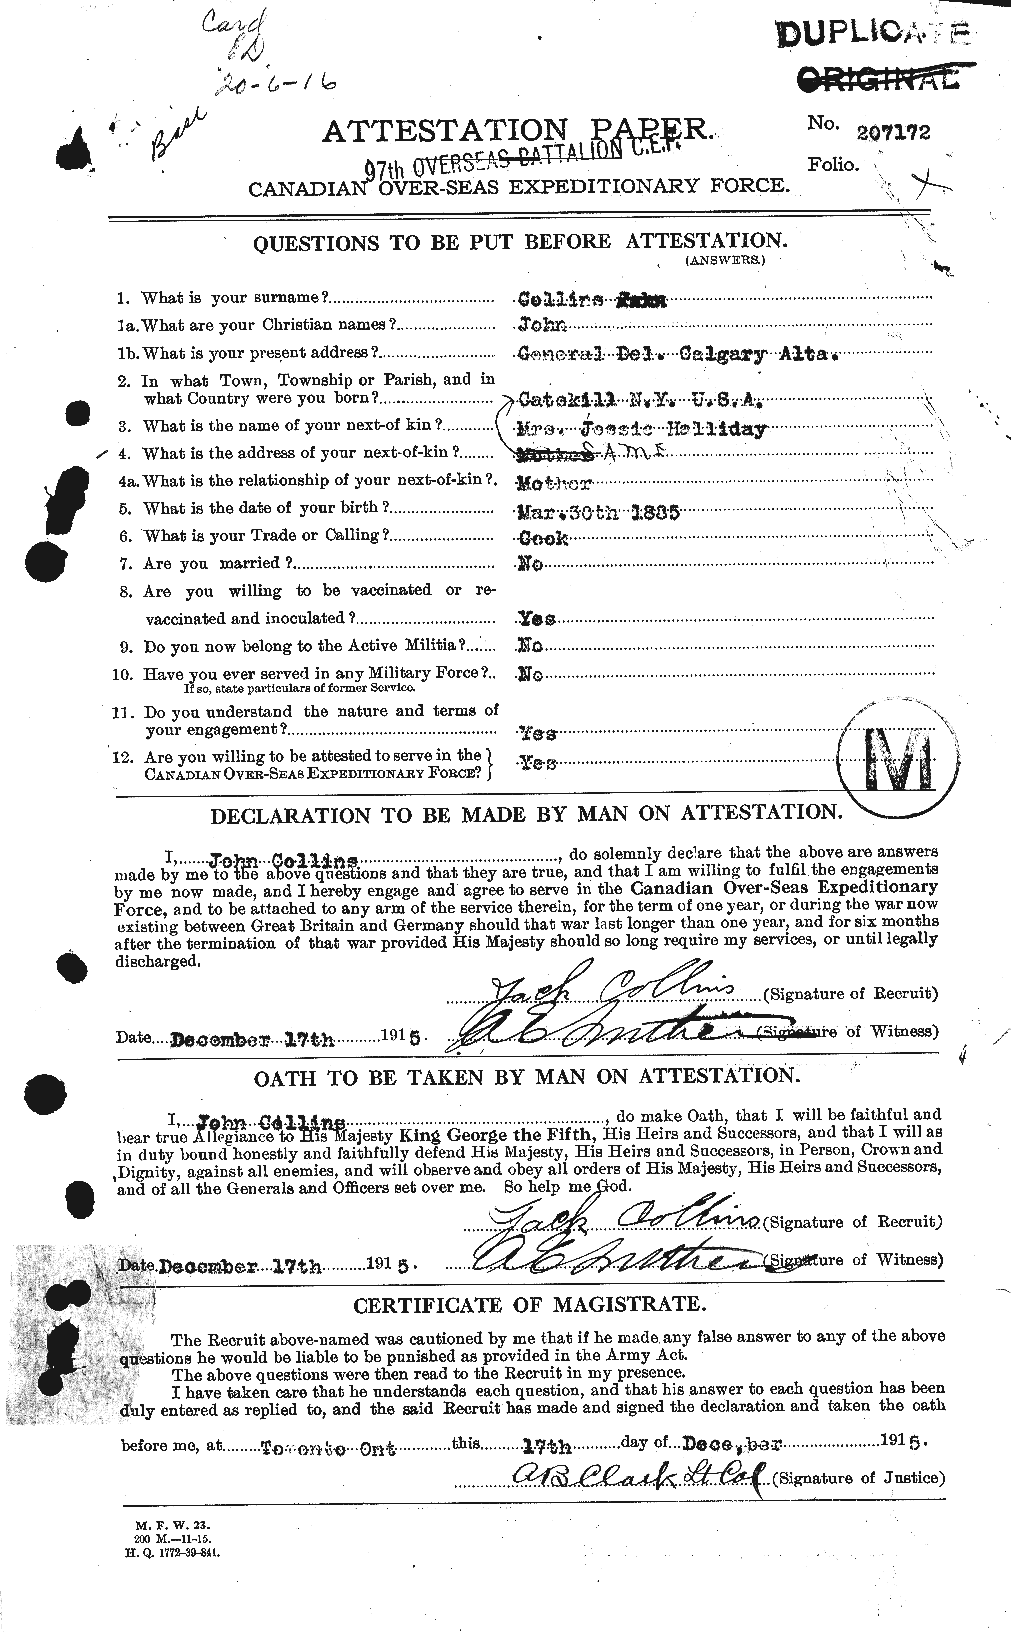 Personnel Records of the First World War - CEF 069807a